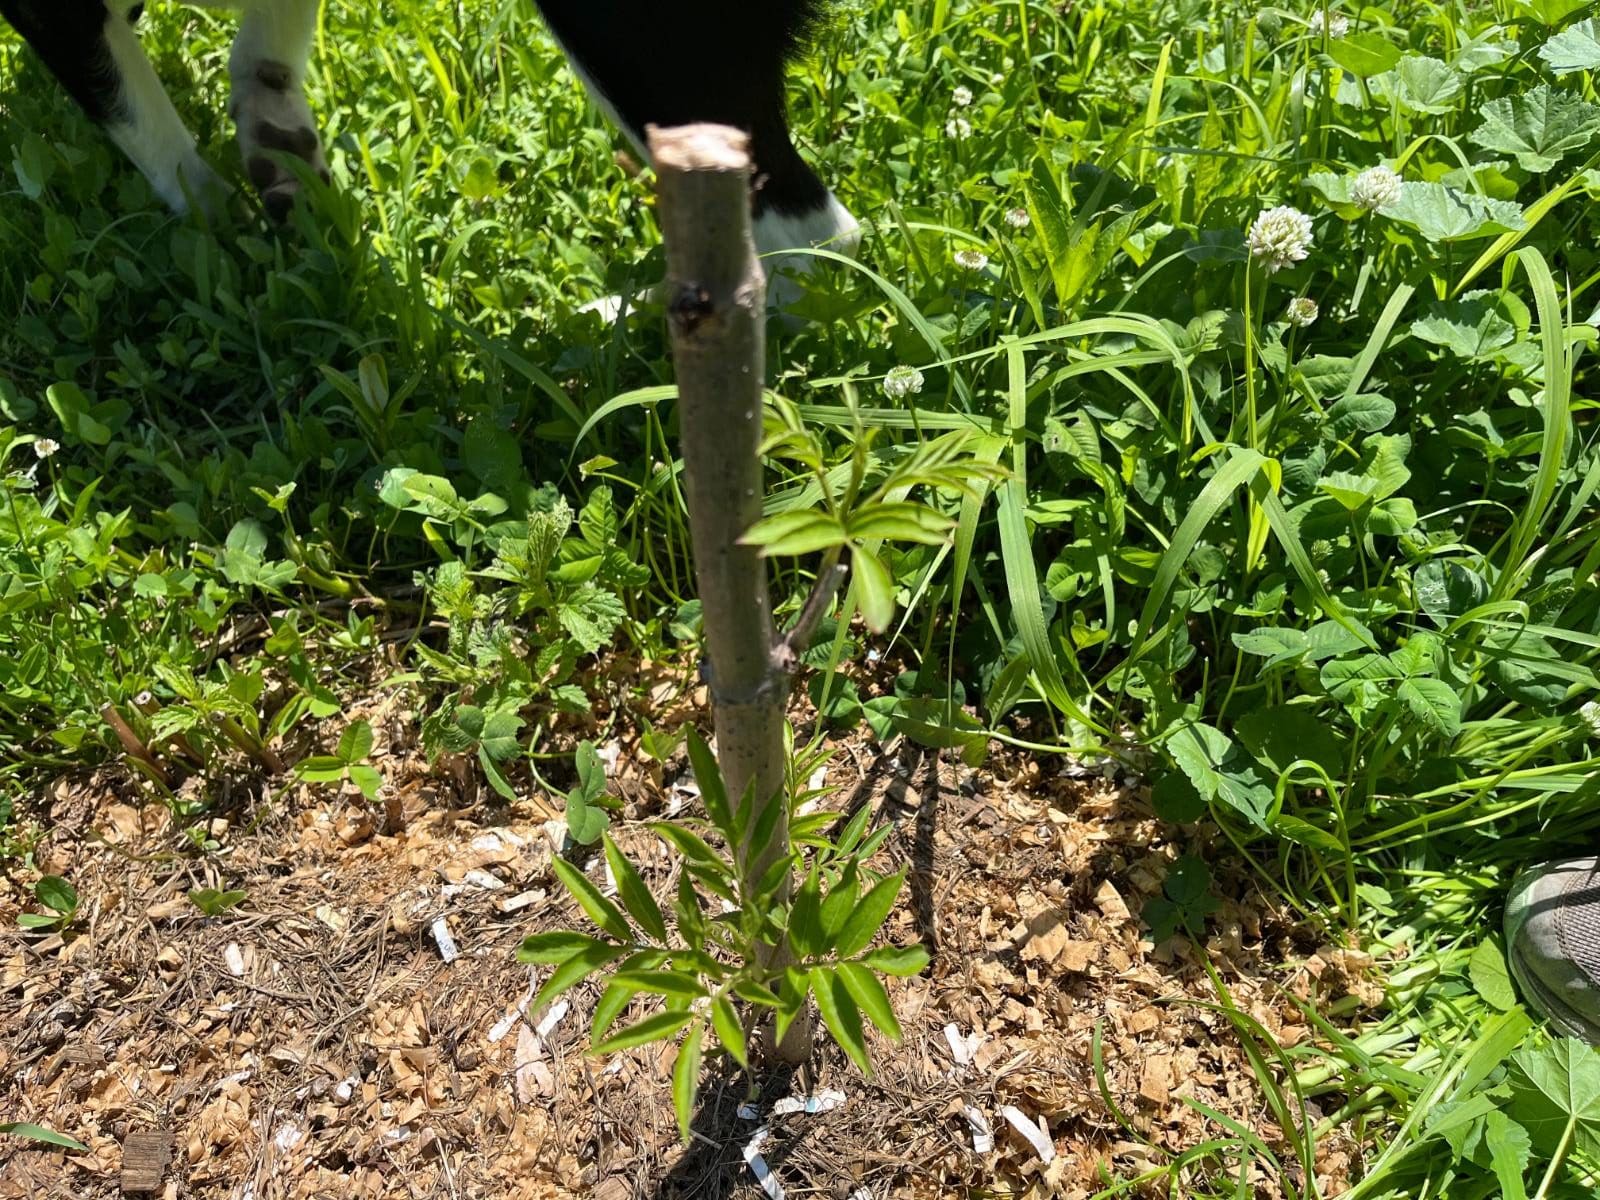 New growth on an elderberry cuttings in the ground